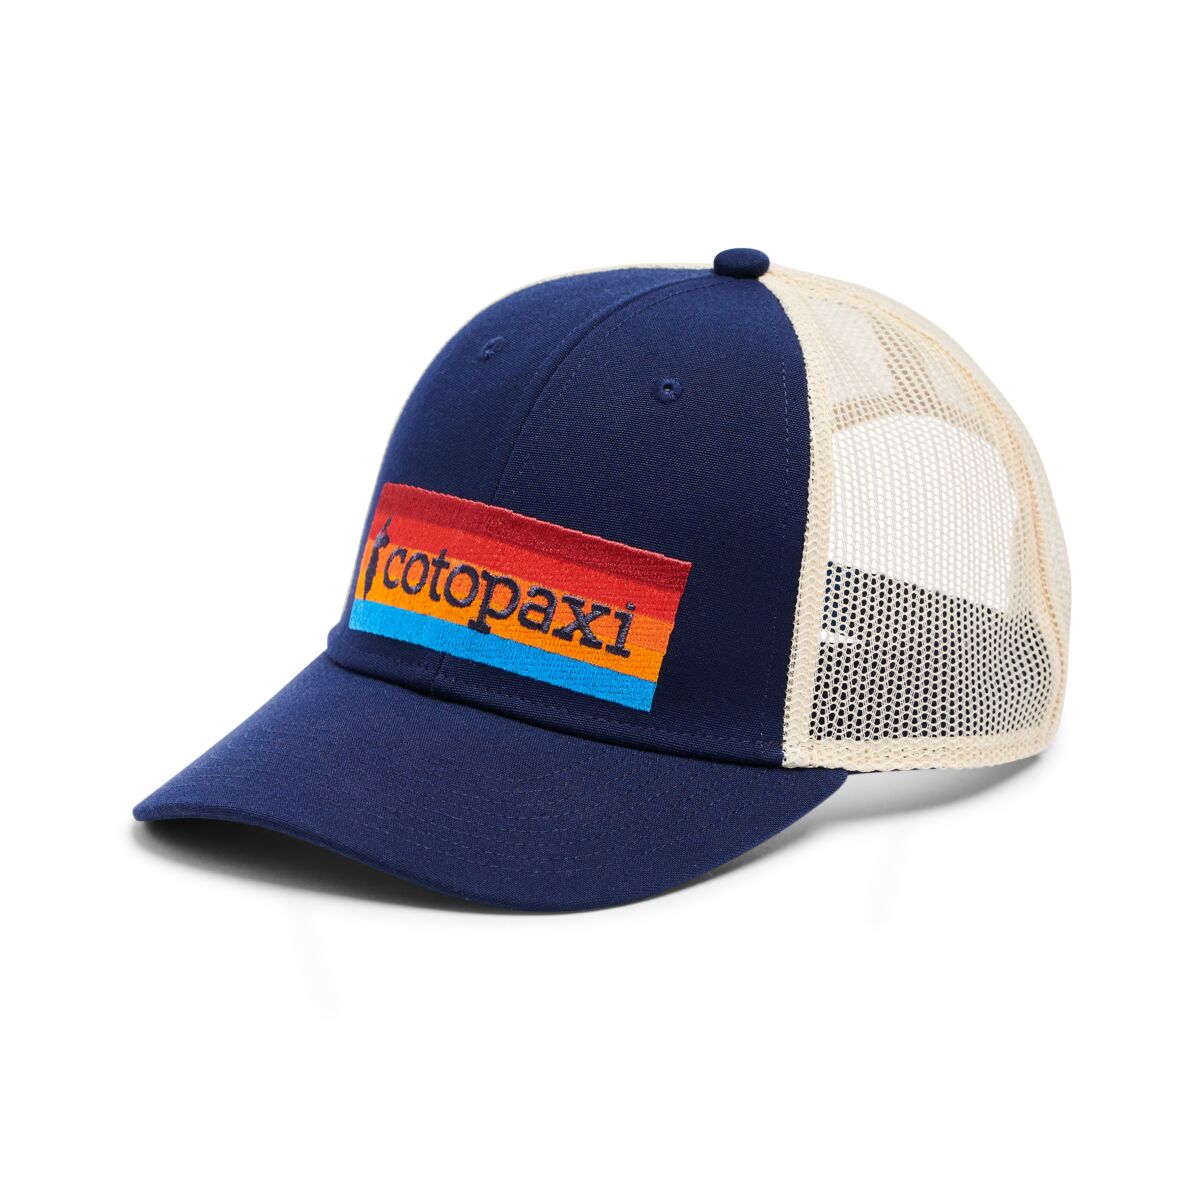 Cotopaxi - On the Horizon Trucker Hat - 100% recycled polyester - Weekendbee - sustainable sportswear